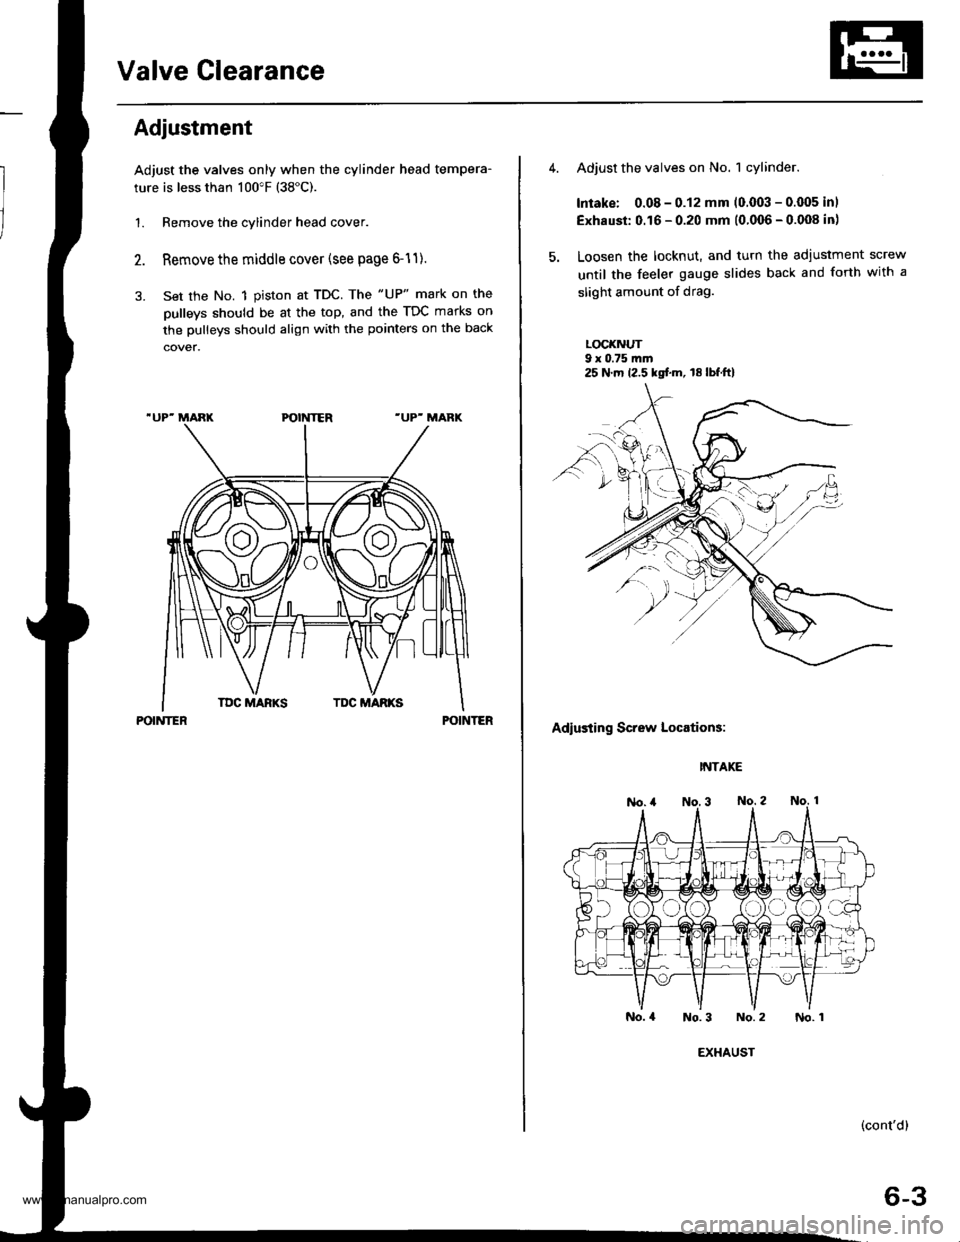 HONDA CR-V 1998 RD1-RD3 / 1.G Workshop Manual 
Valve Clearance
Adiustment
Adjust the valves only when the cylinder head tempera-
ture is less than 100"F (38"C).
1. Remove the cylinder head cover.
Remove the middle cover (see page 6-11).
Set the N